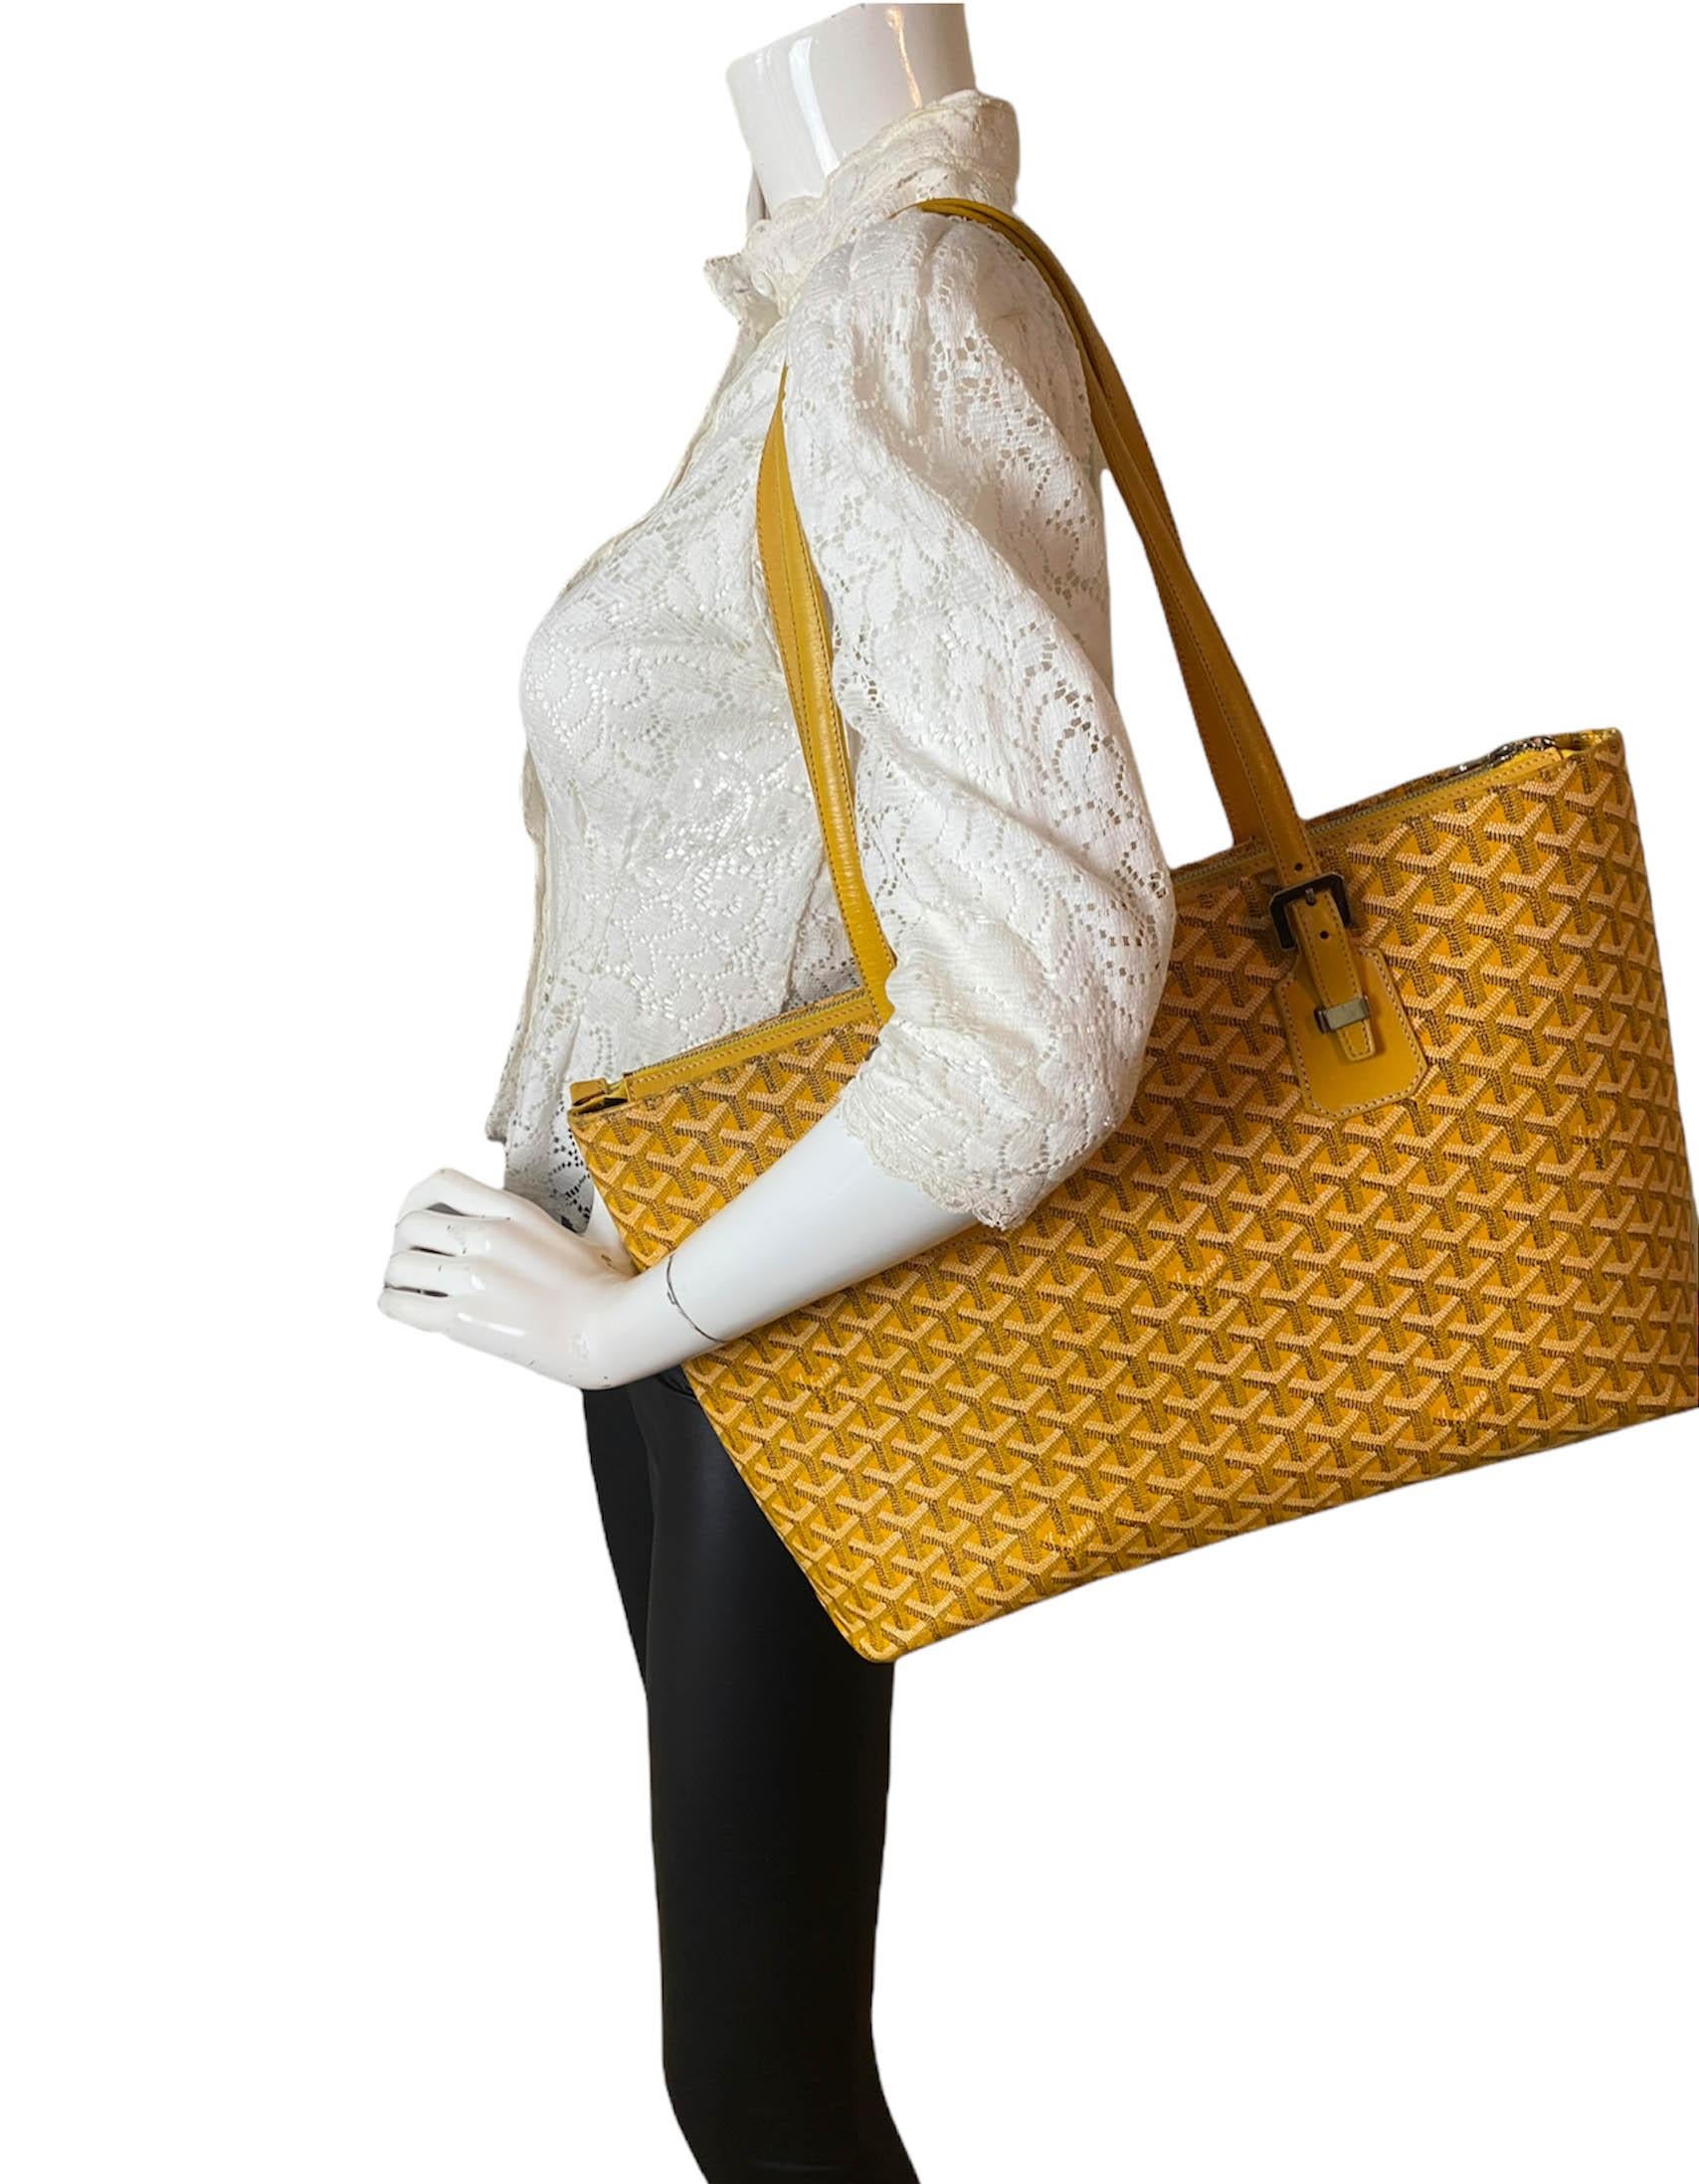 Goyard Yellow Goyardine Okinawa GM Tote Bag

Made In: Italy
Color: Yellow
Hardware: Silver
Materials: Coated canvas and leather
Lining: Fine textile
Closure/Opening: Zip top
Exterior Pockets: None
Interior Pockets: One zip, one slit
Exterior